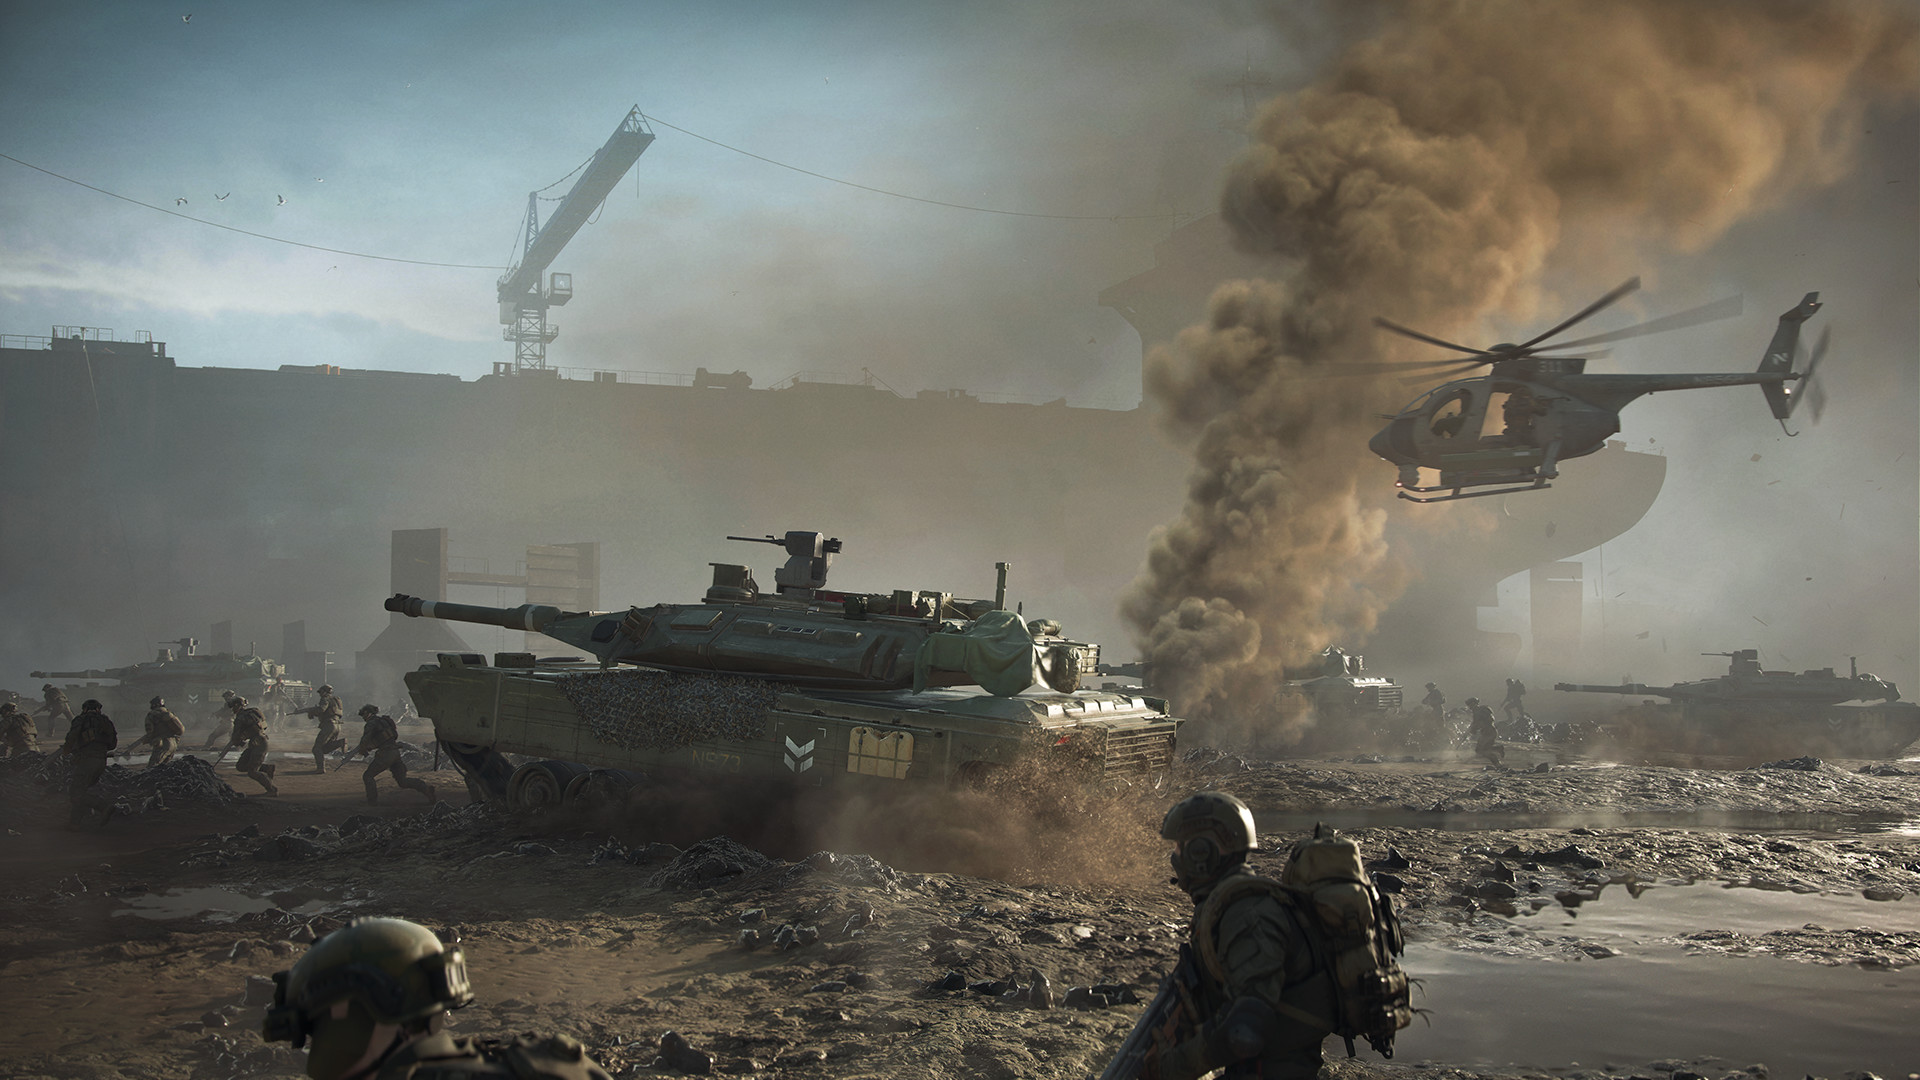 General 1920x1080 Battlefield 2042 Battlefield (game) video game art tank helicopters soldier